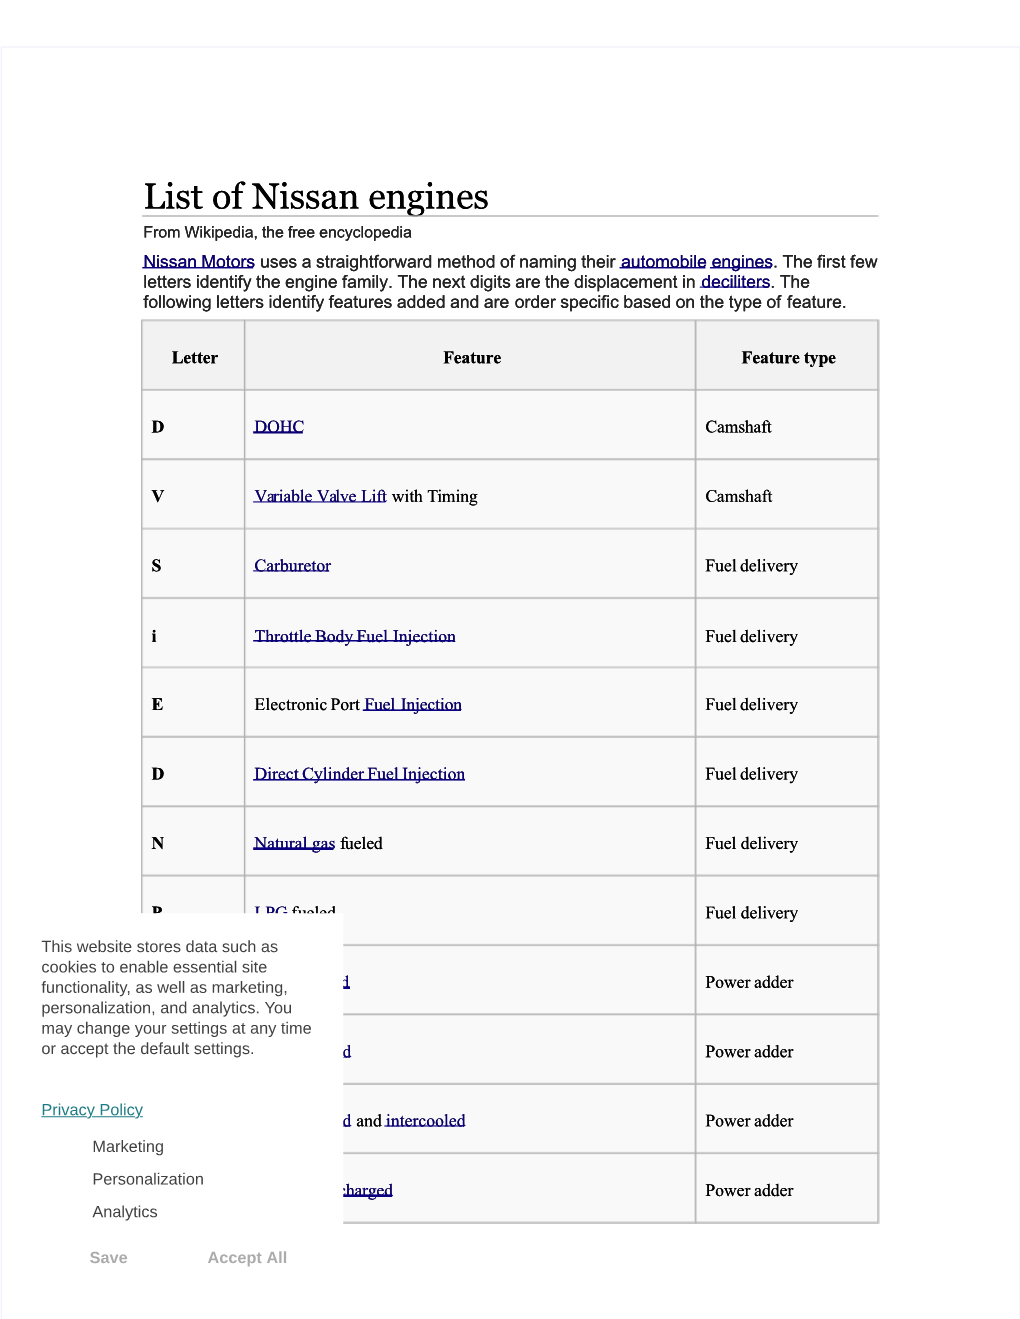 List of Nissan Engines from Wikipedia, the Free Encyclopedia Nissan Motors Uses a Straightforward Method of Naming Their Automobile Engines